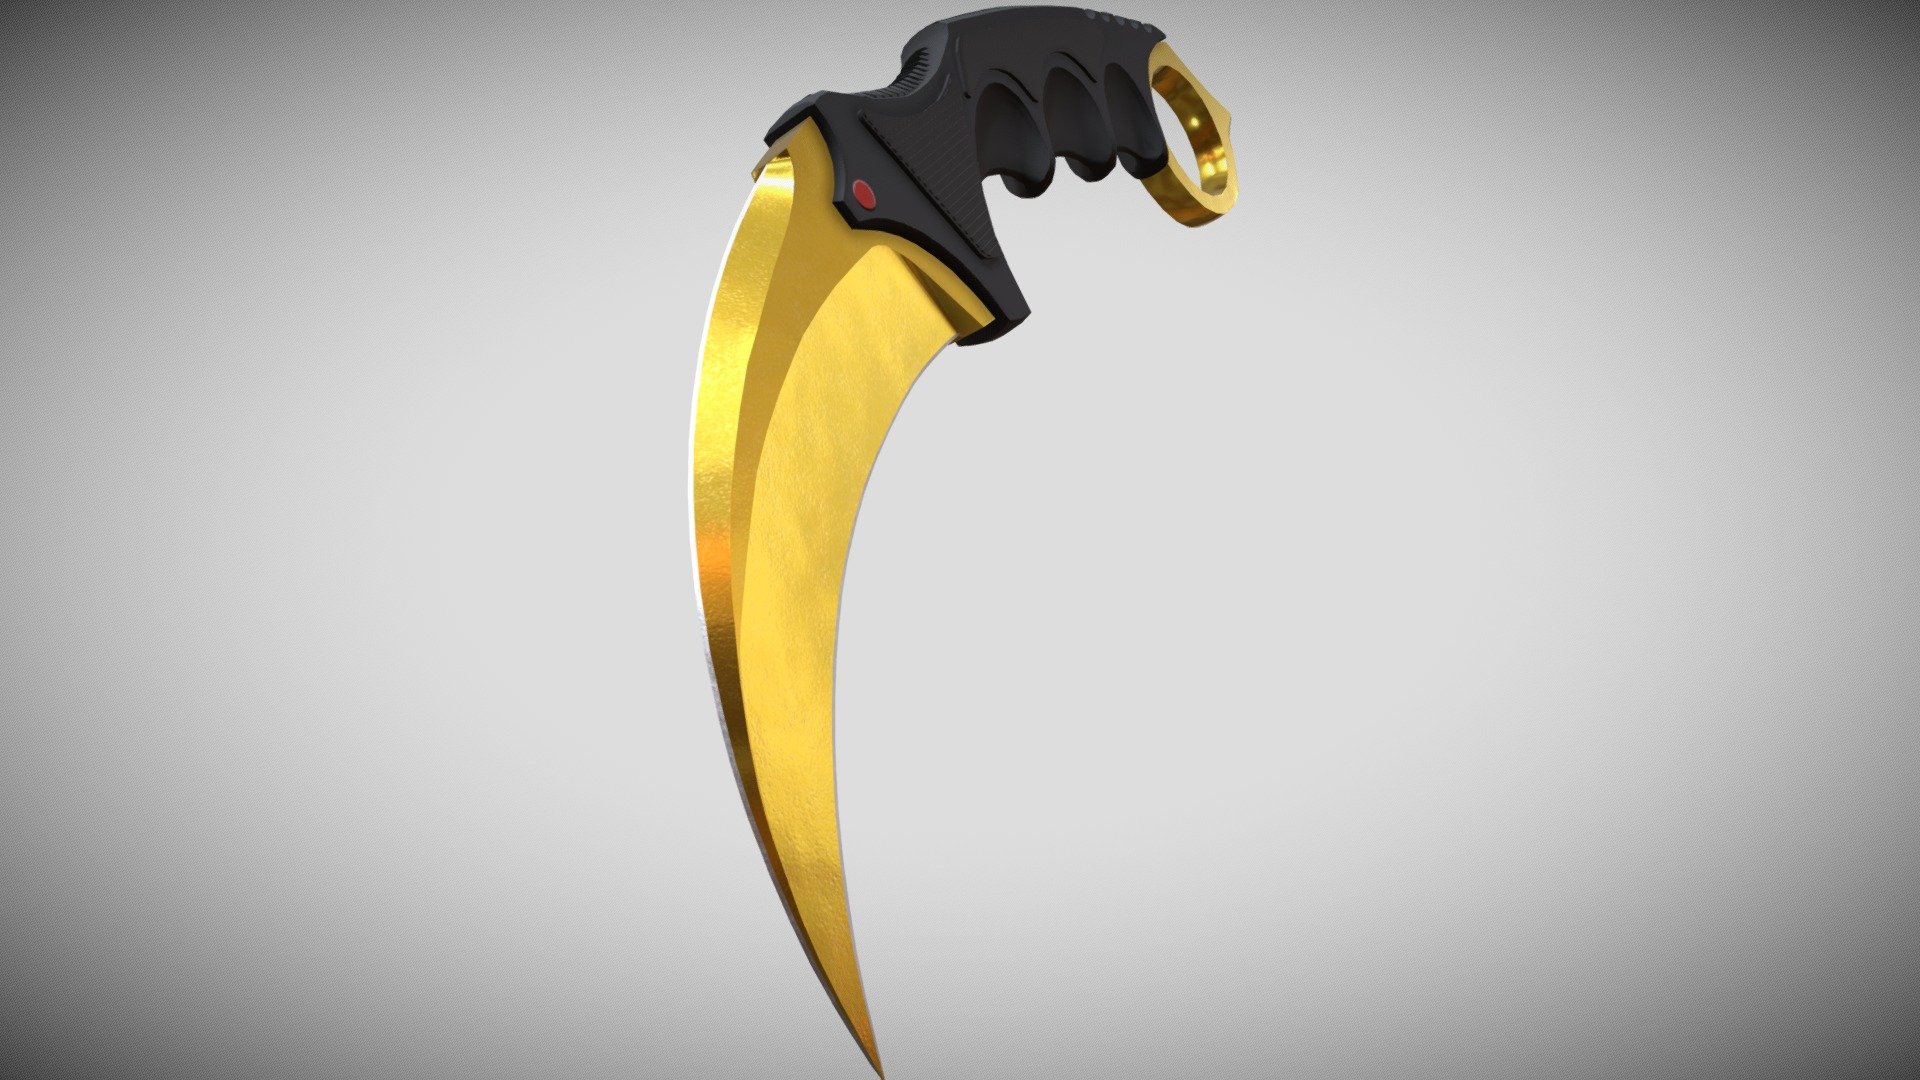 Karambit Knife from CS:GO with Gold pattern Model made in Autodesk MAYA, textured and rendered in Substance Painter - Karambit Knife Gold - Buy Royalty Free 3D model by P7PO (@PiPo07) 3d model